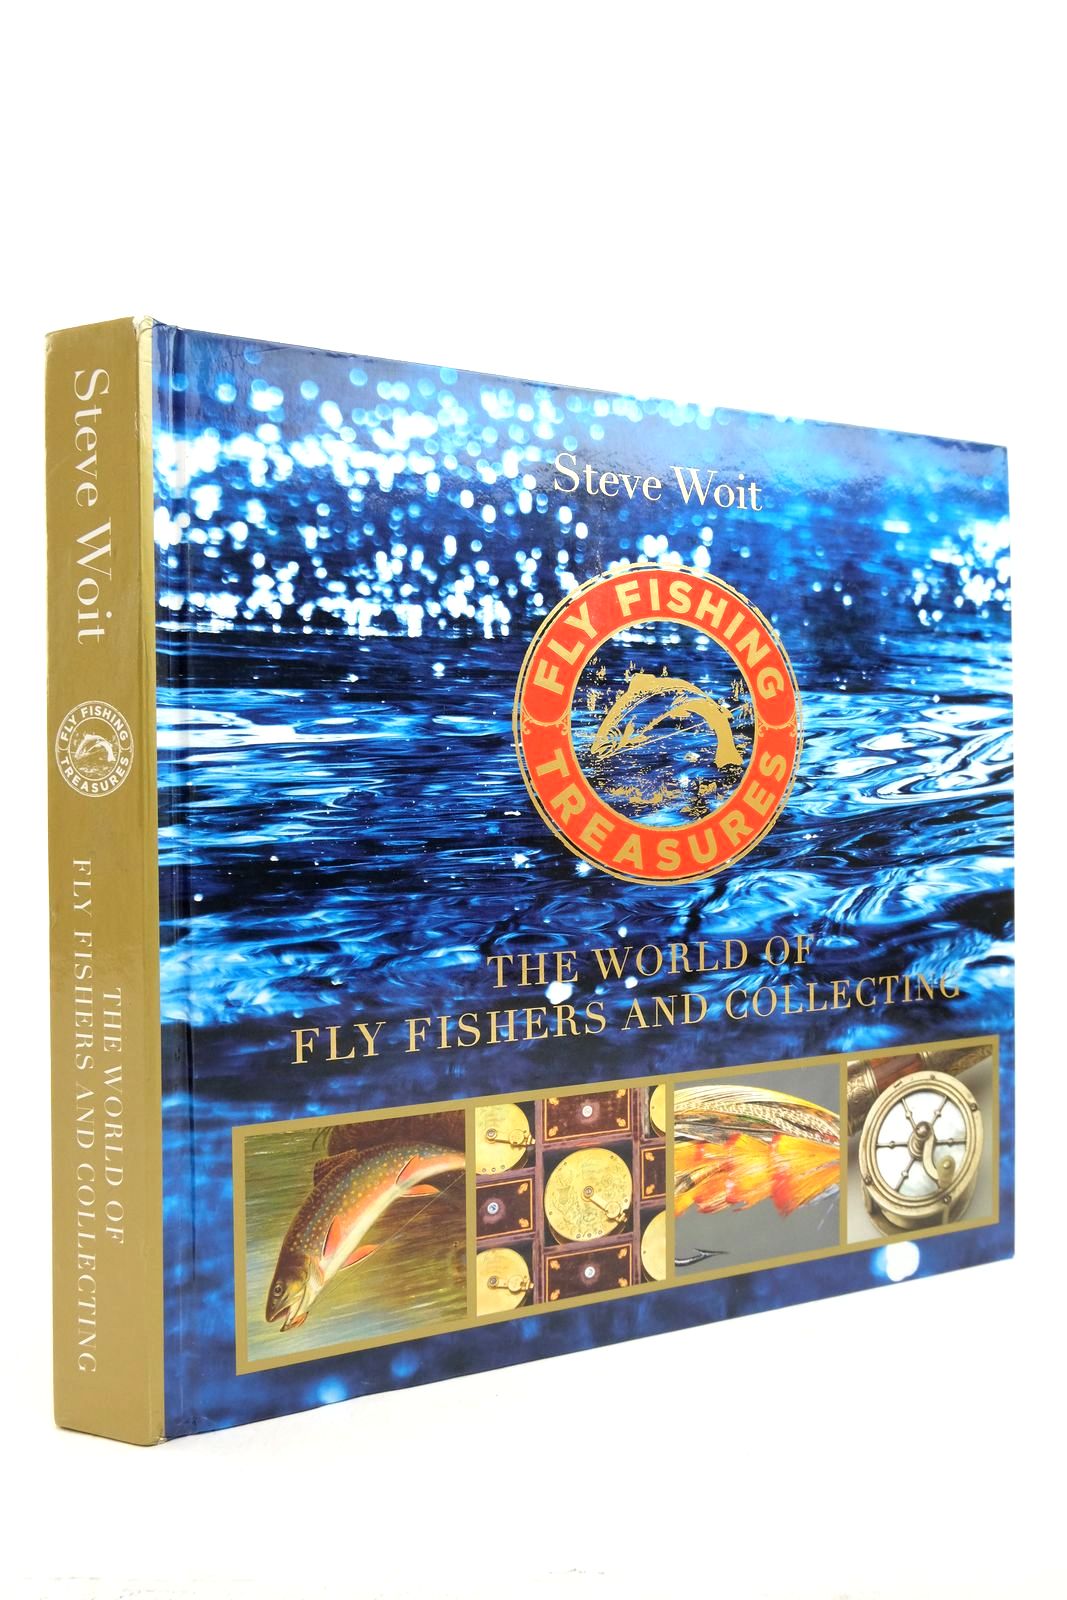 Photo of FLY FISHING TREASURES: THE WORLD OF FLY FISHERS AND COLLECTING written by Woit, Steve et al, (STOCK CODE: 2140063)  for sale by Stella & Rose's Books